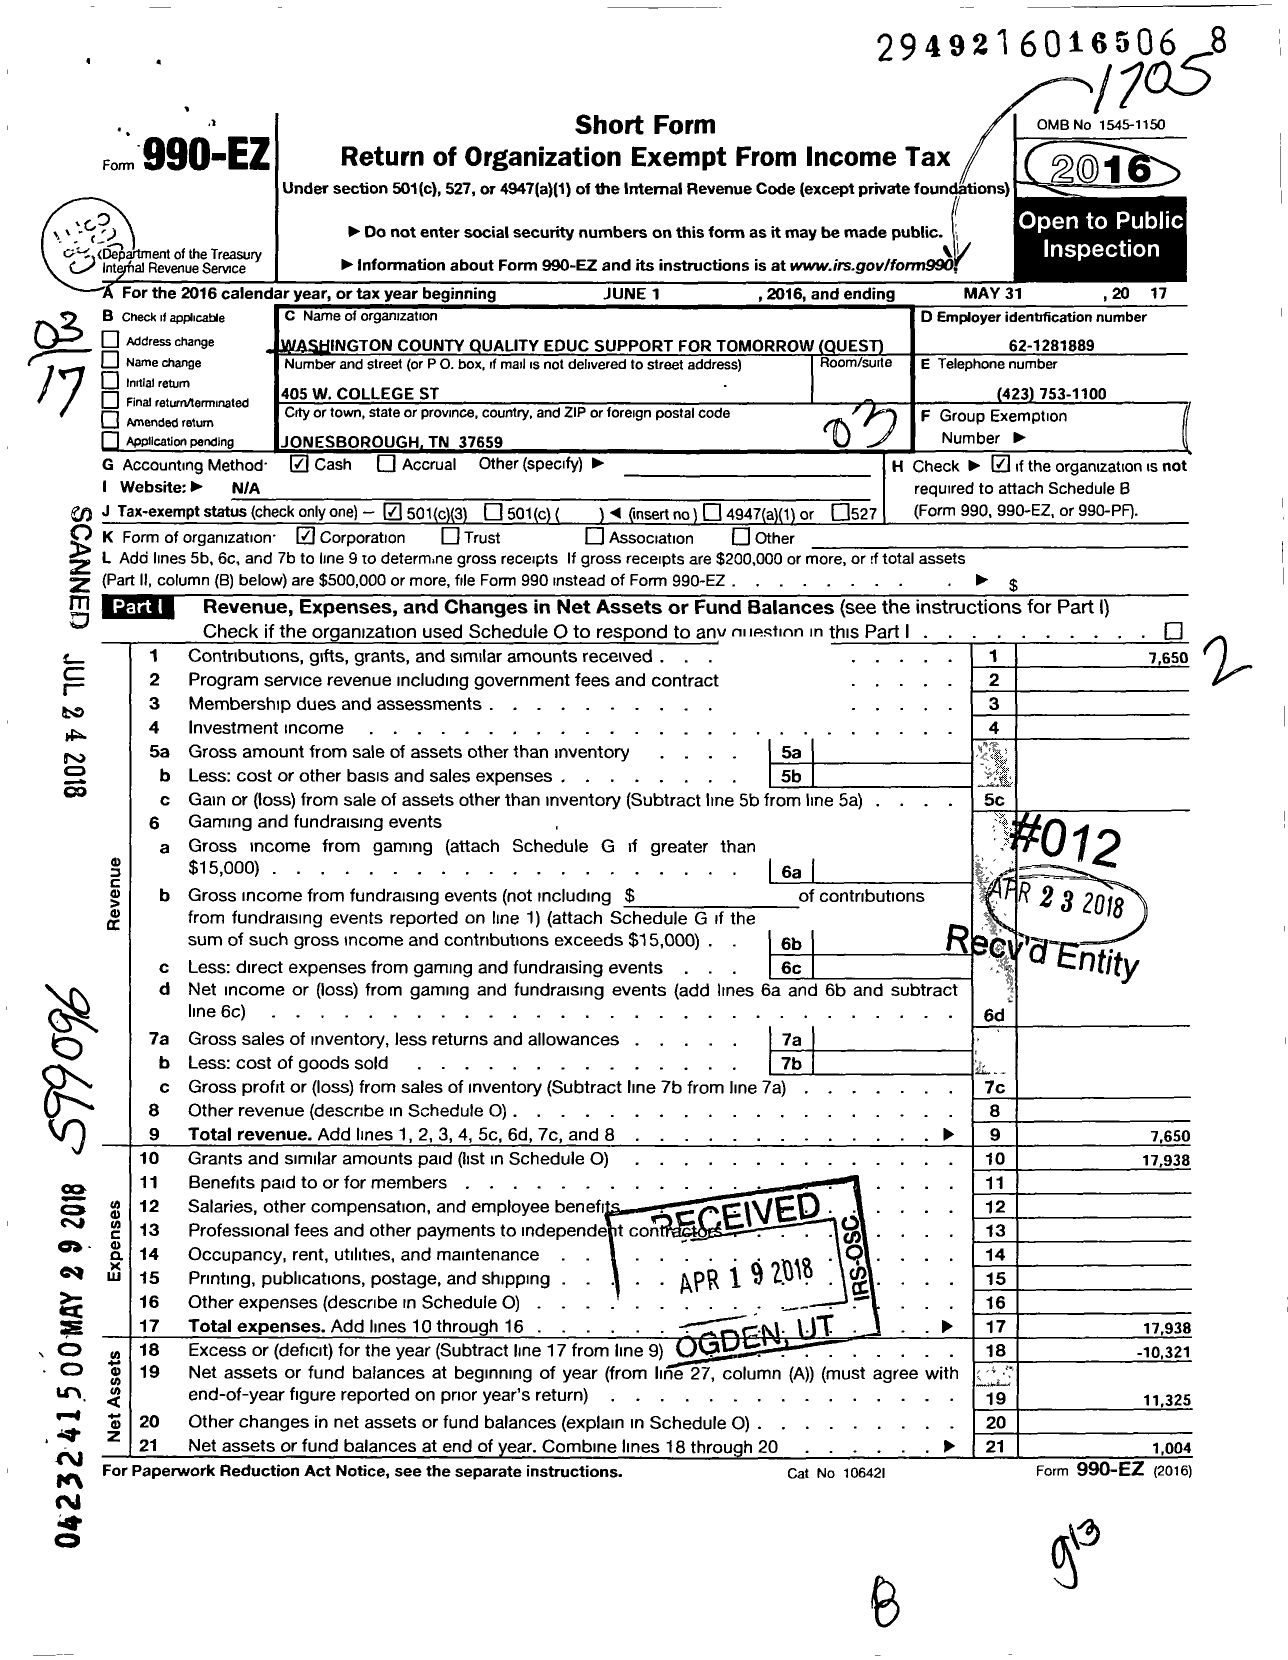 Image of first page of 2016 Form 990EZ for Washington County Quality Educ Support for Tomorrow Quest